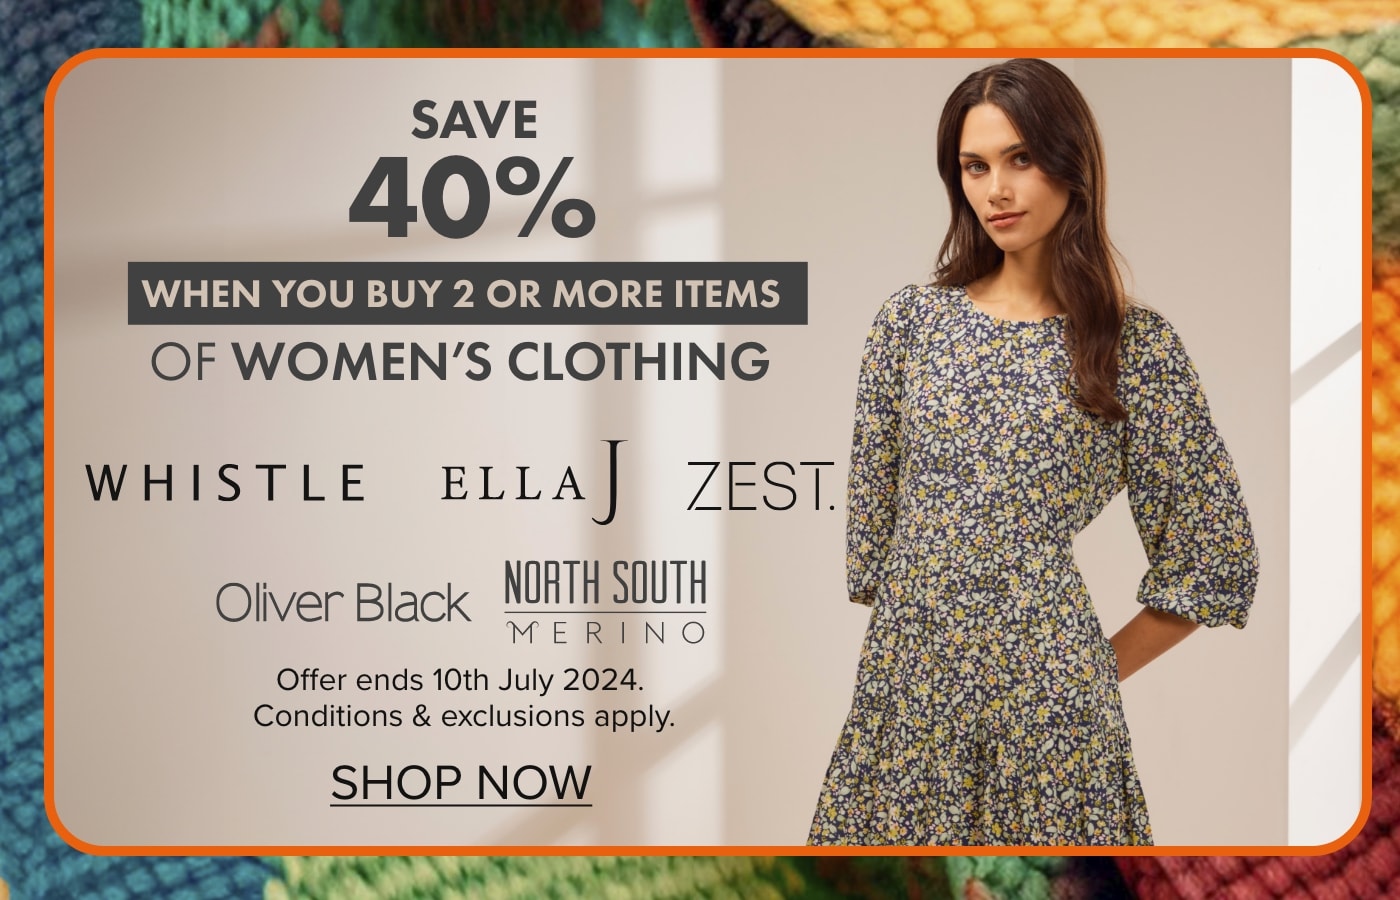 SAVE 40% when you buy 2 or more items of Women's Clothing by Whistle, Ella J, Zest, Oliver Black & North South Merino